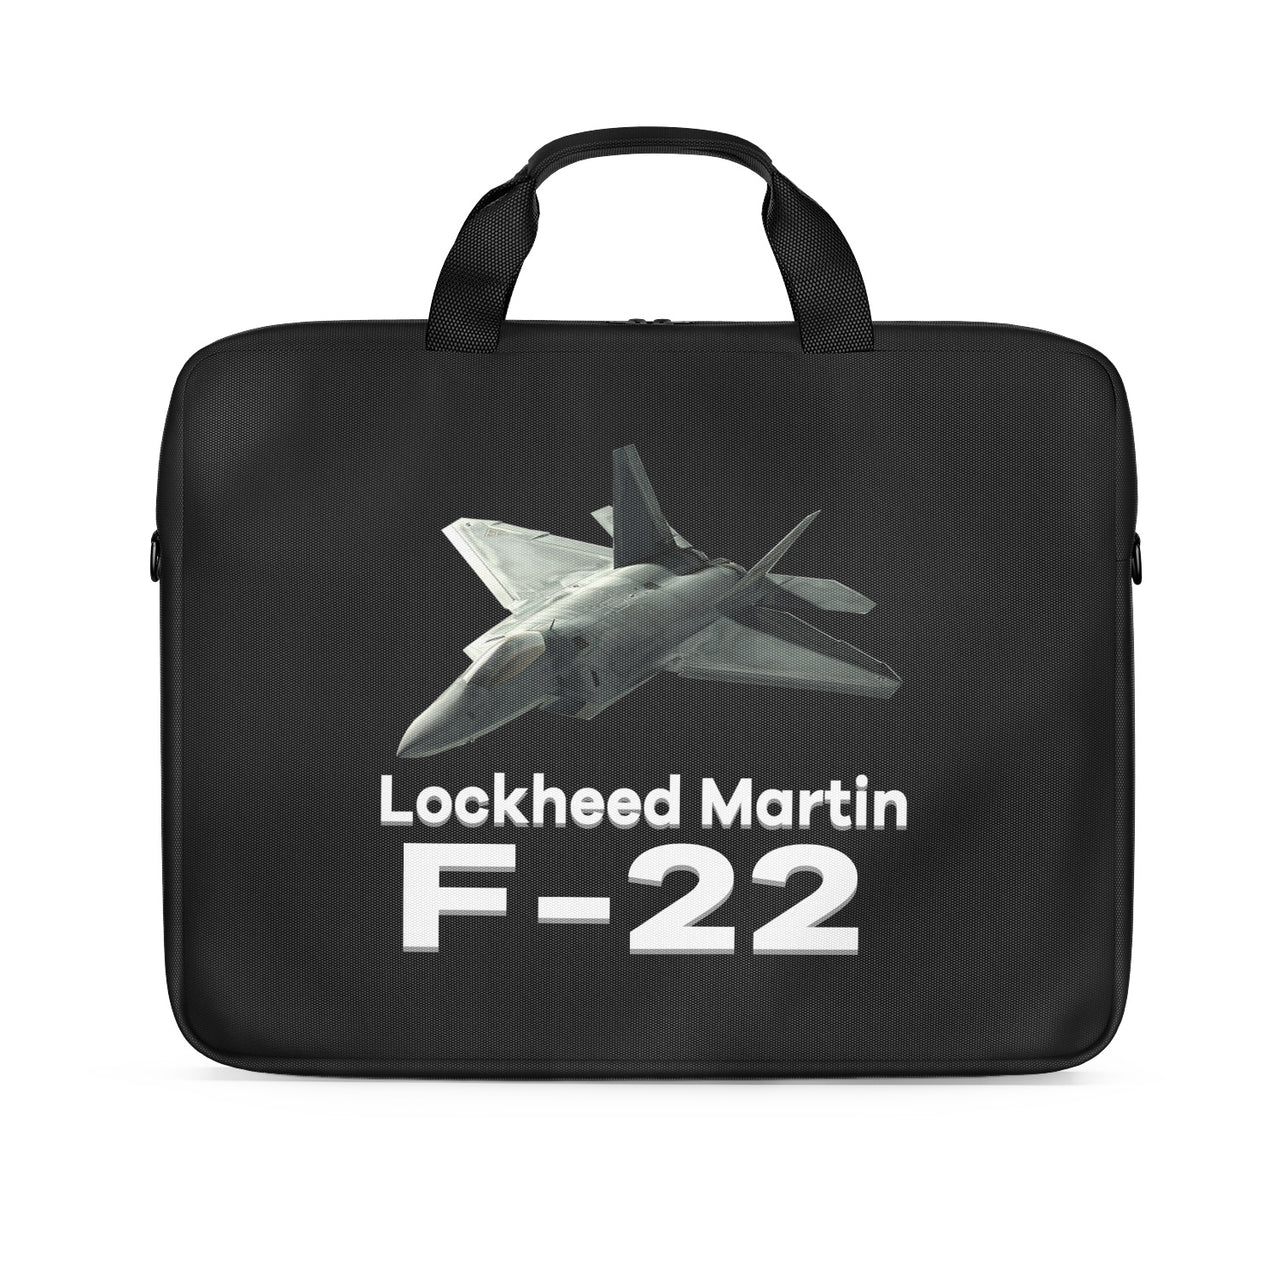 The Lockheed Martin F22 Designed Laptop & Tablet Bags